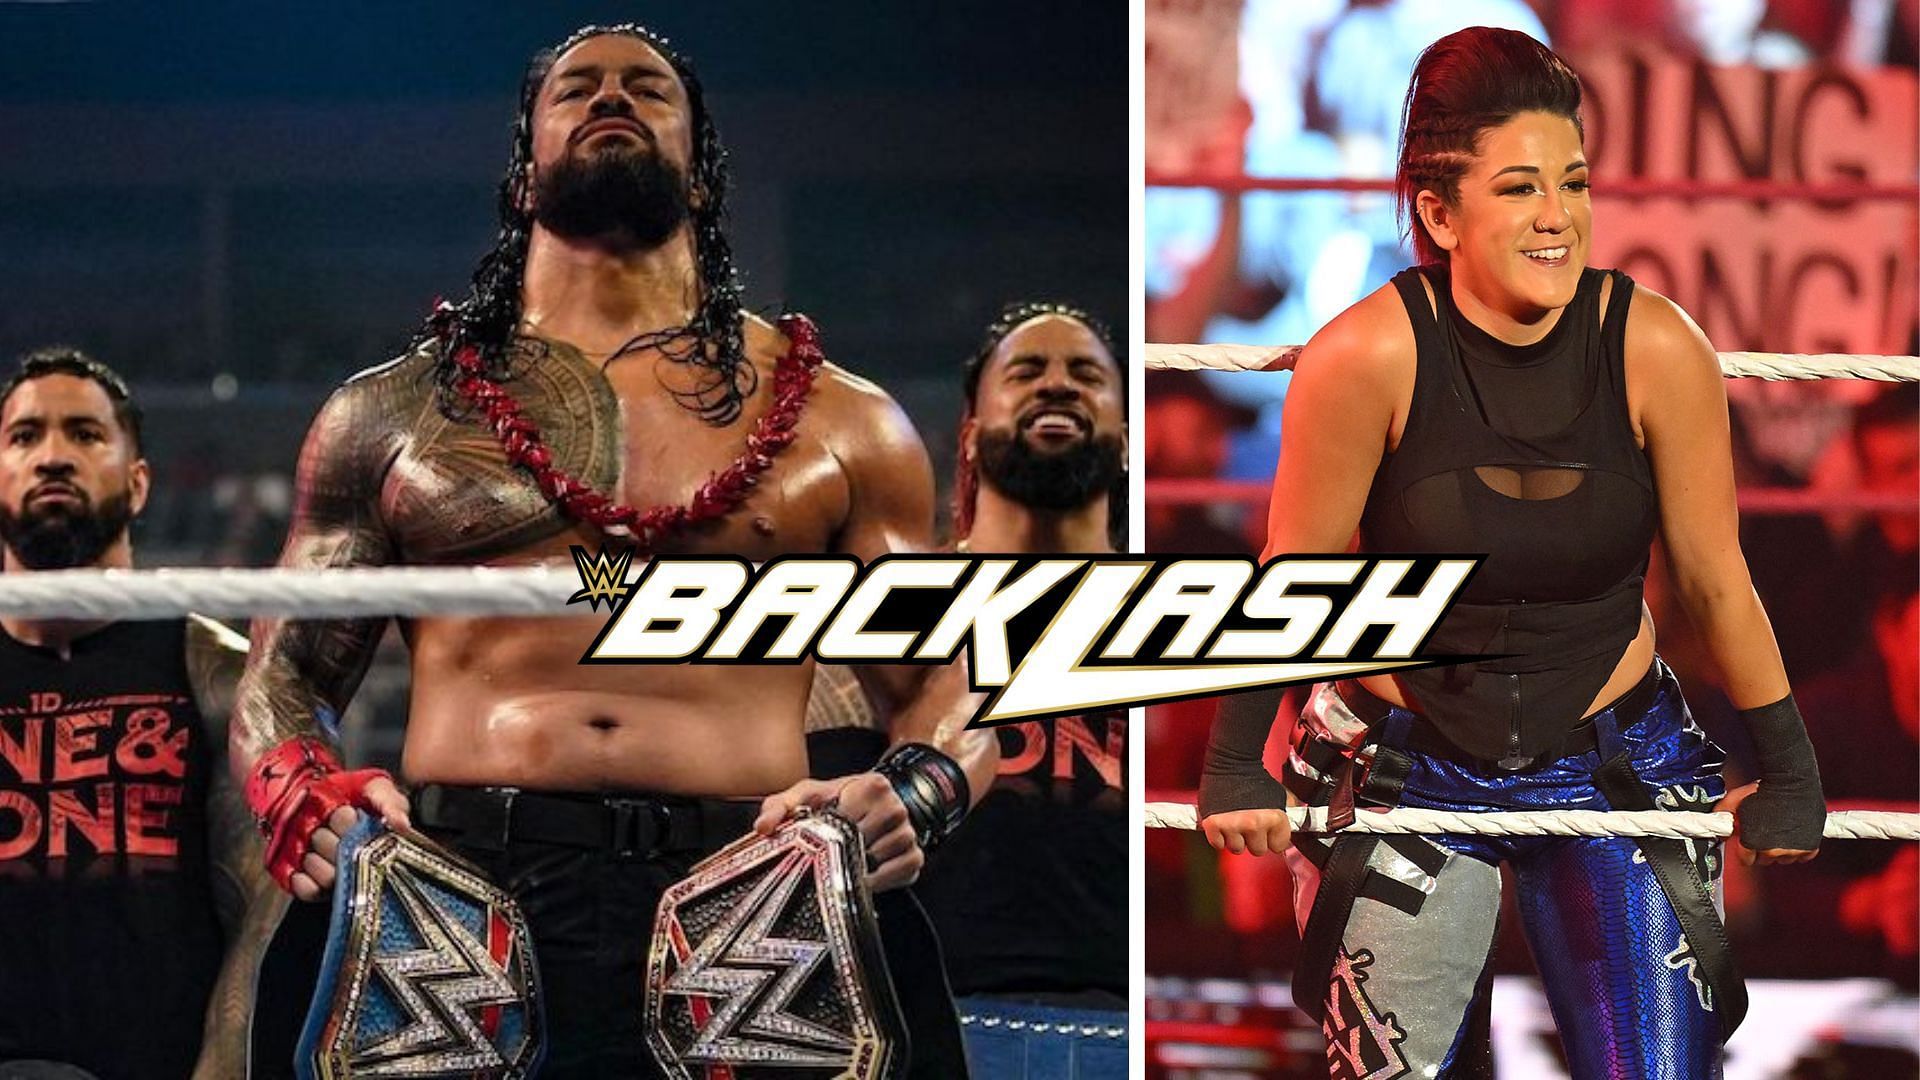 WWE Backlash 2023 is set to be a blockbuster extravaganza